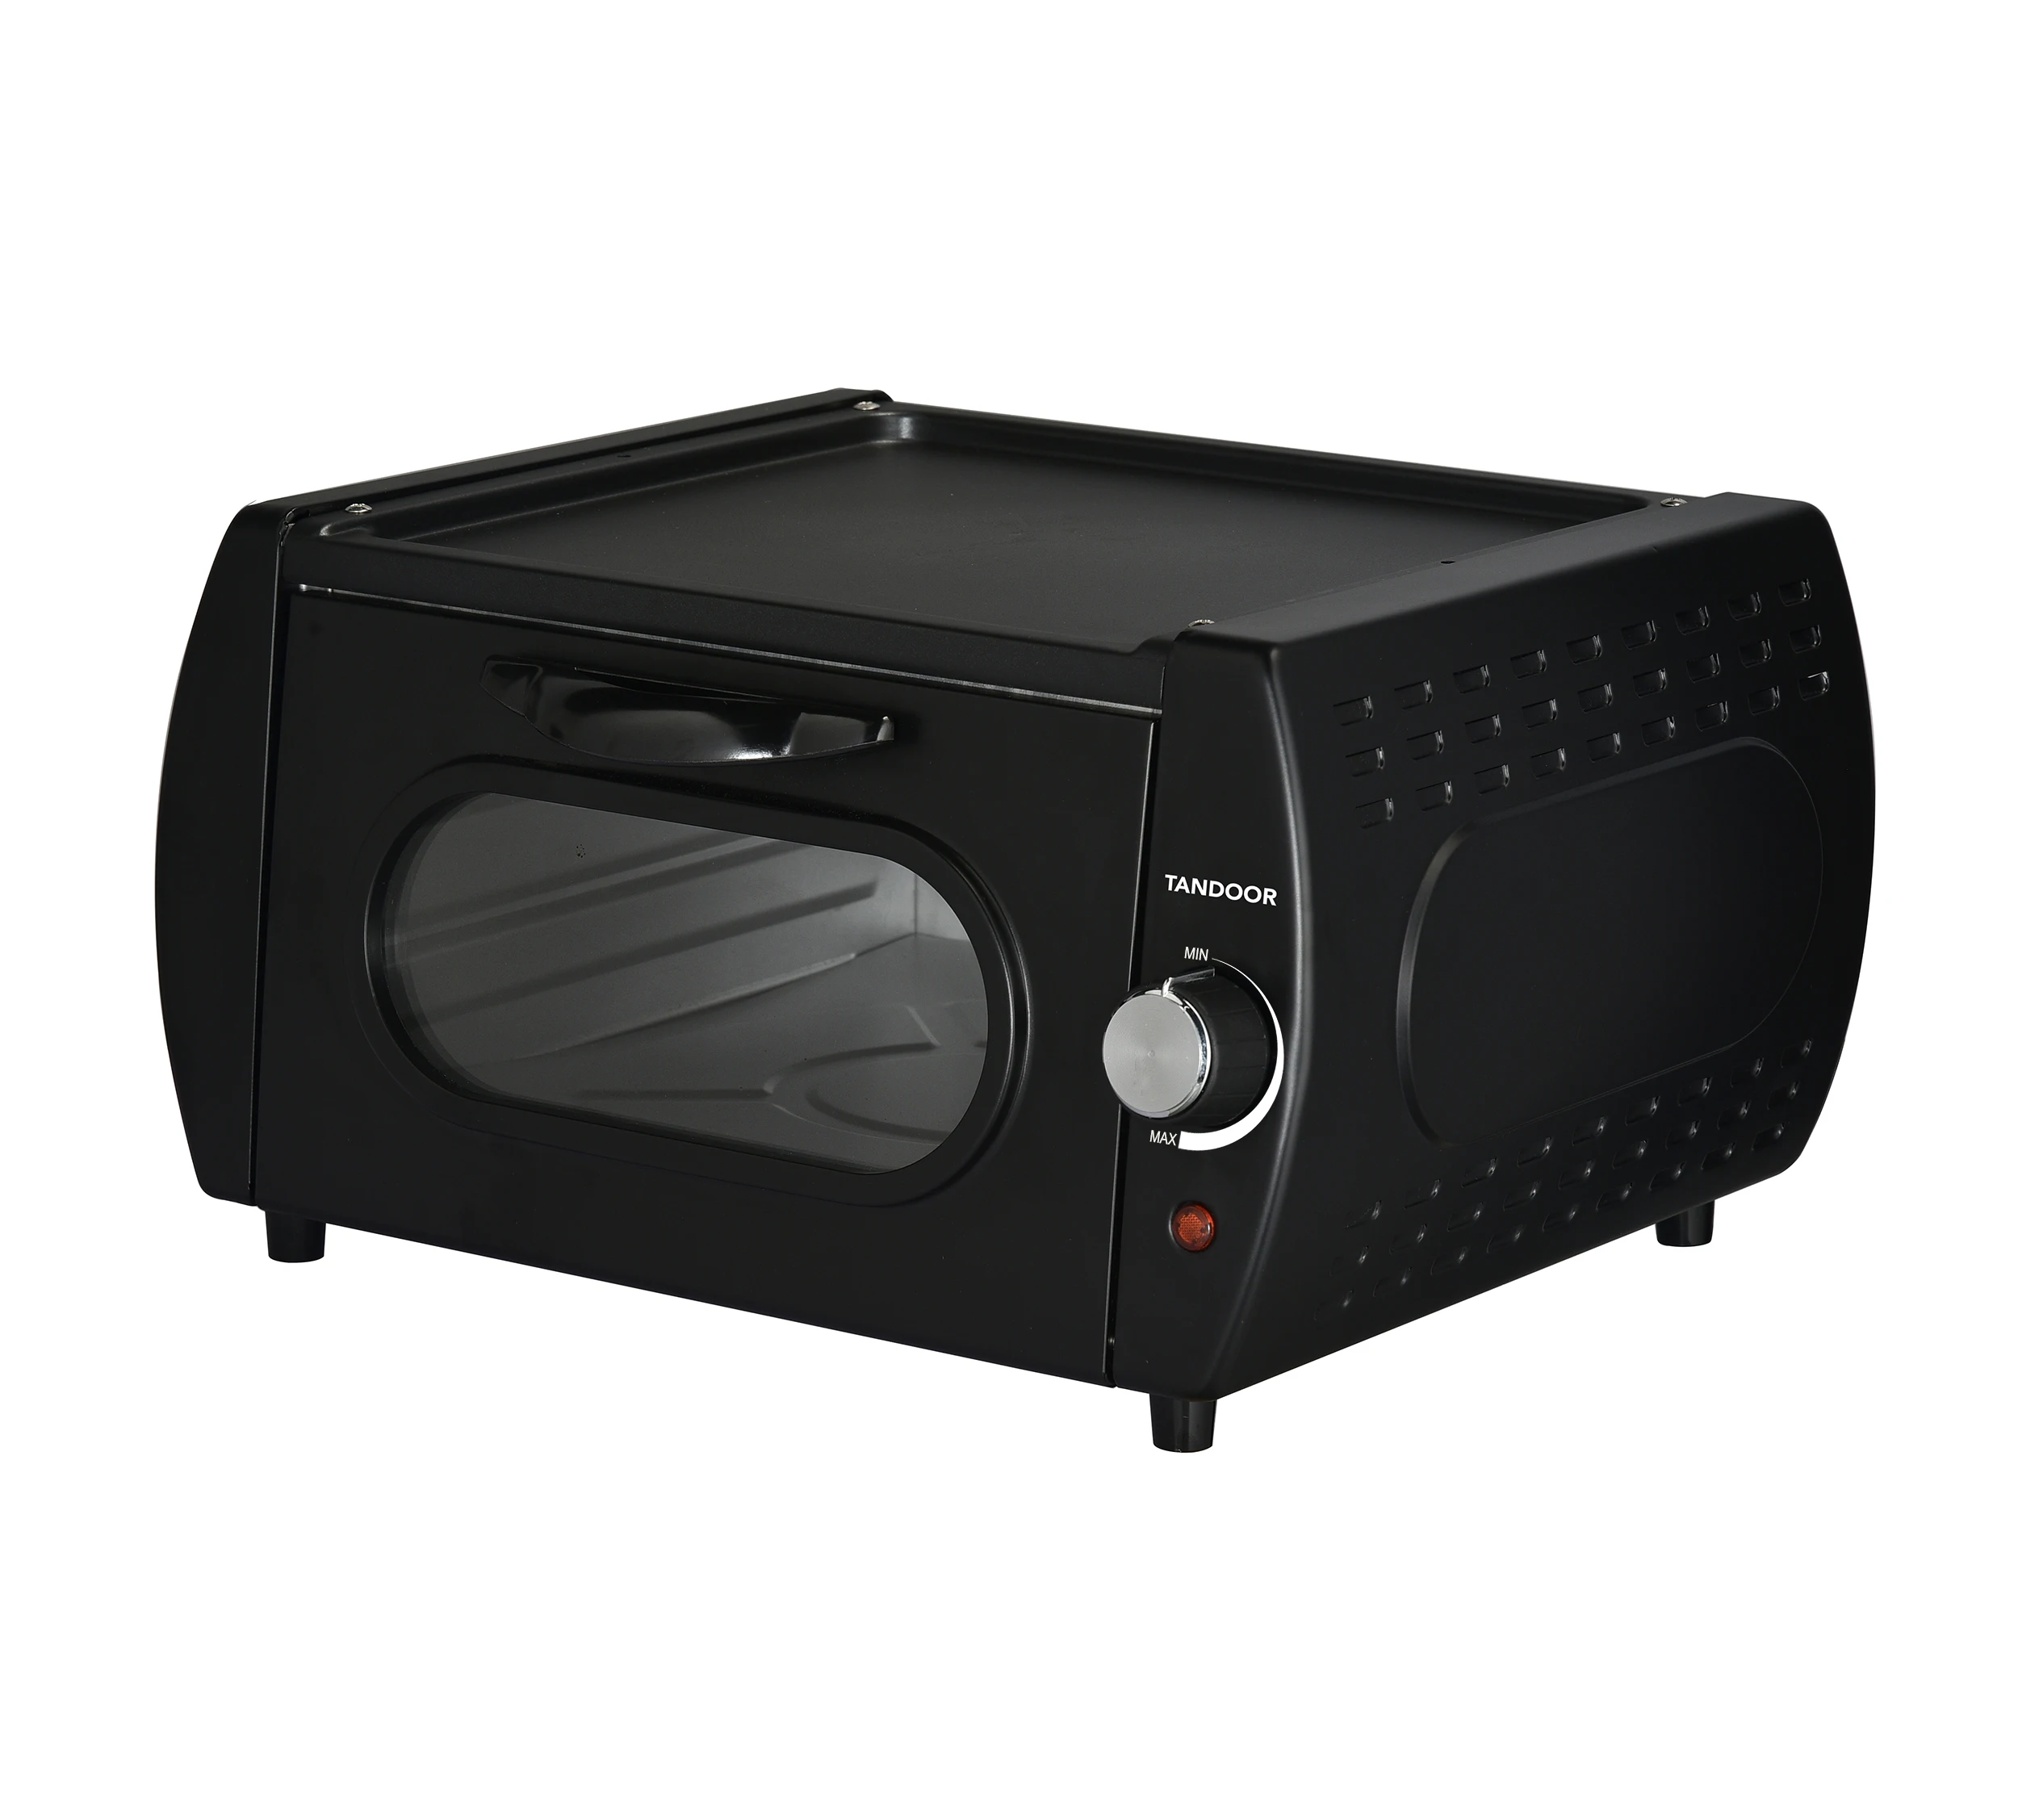 Posida Electric Tandoor Toaster Oven Baked 2100W Pizza Naan Chapati Maker -  China Toaster Oven and Oven price